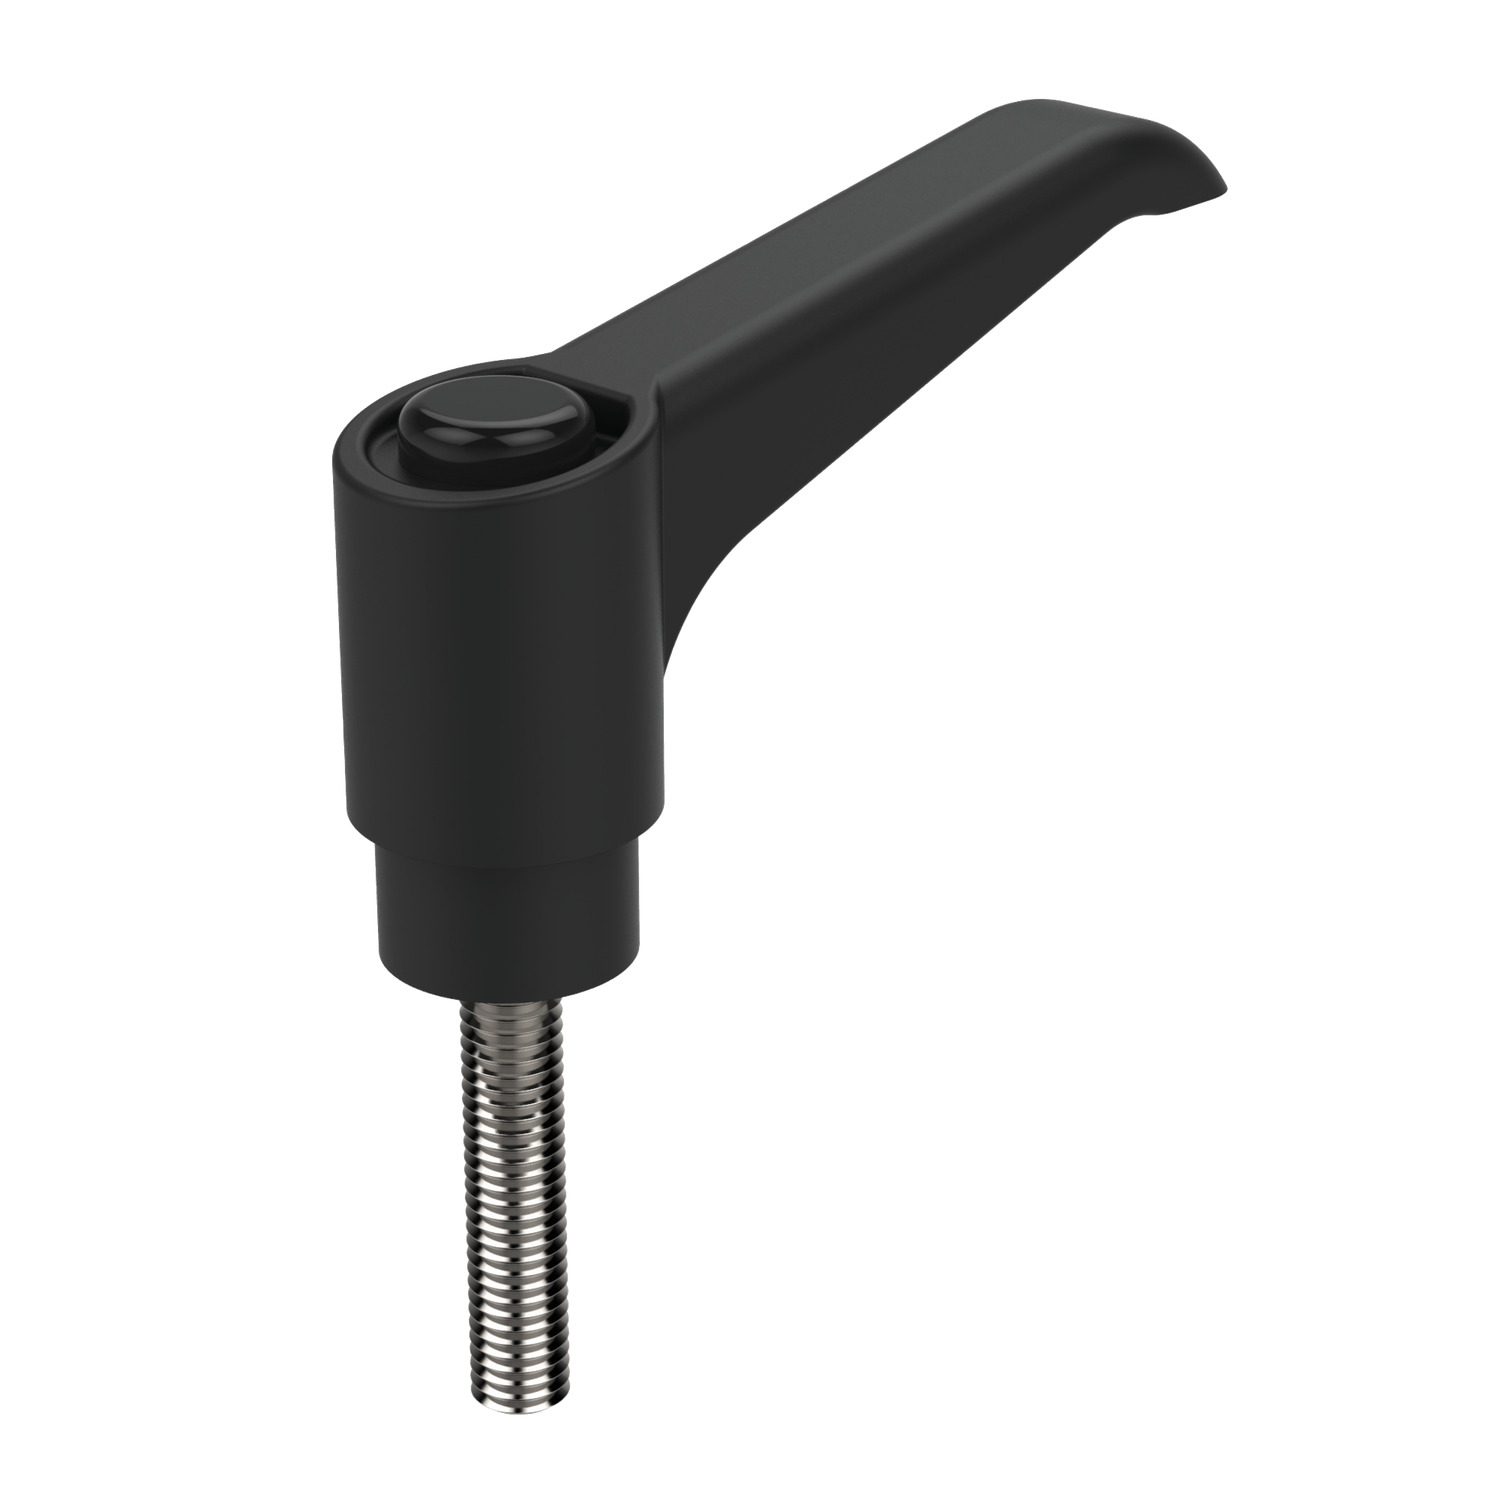 Adjustable Clamping Levers Plastic clamping levers are available in male and female. Wide range of styles also available.